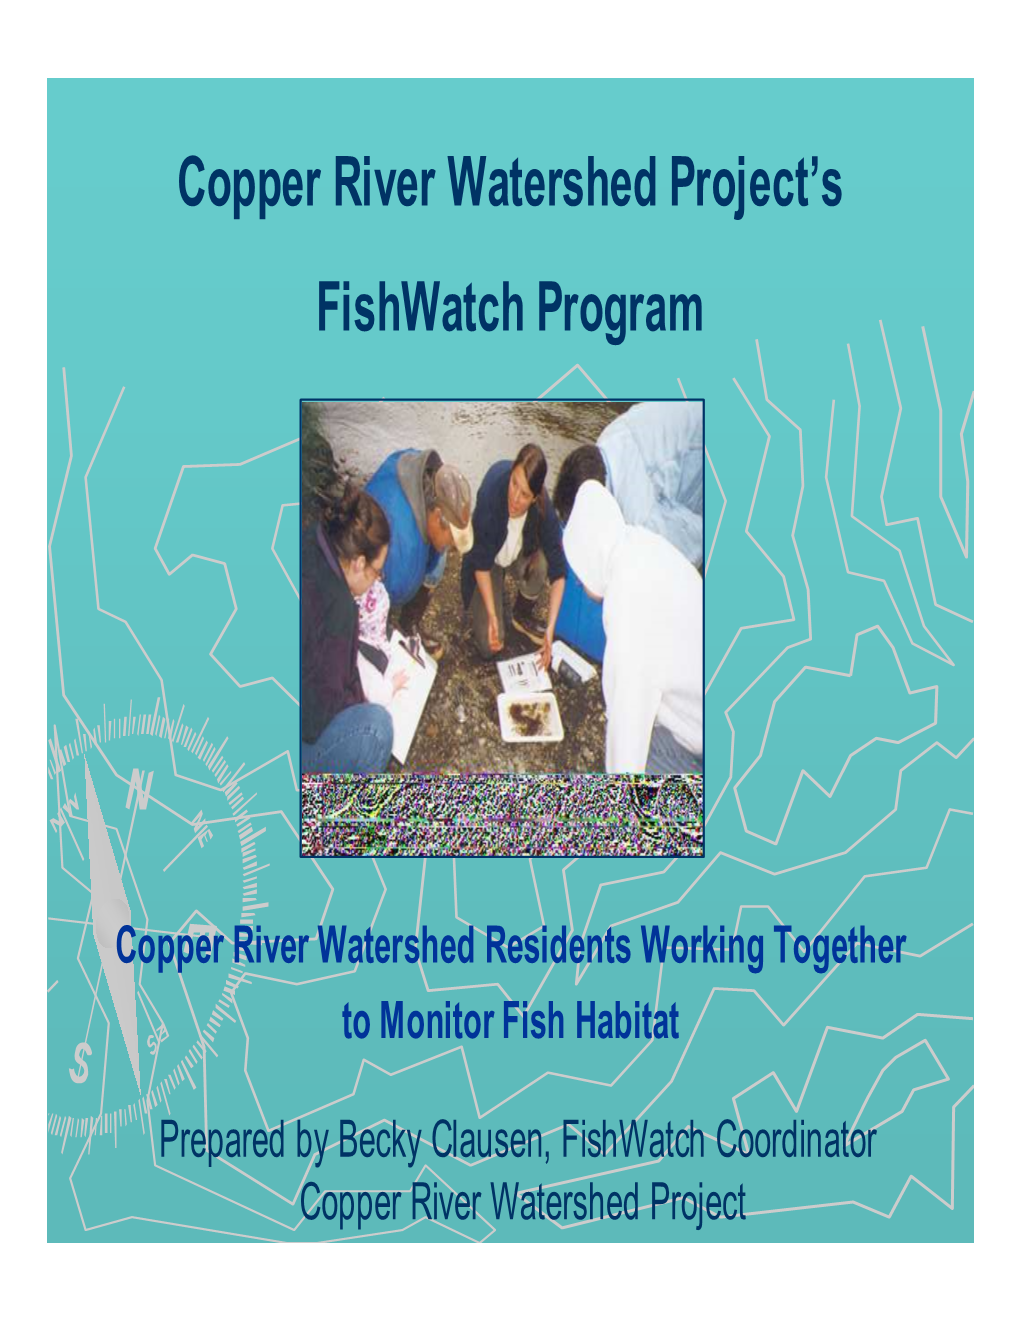 Copper River Watershed Project's Fishwatch Program